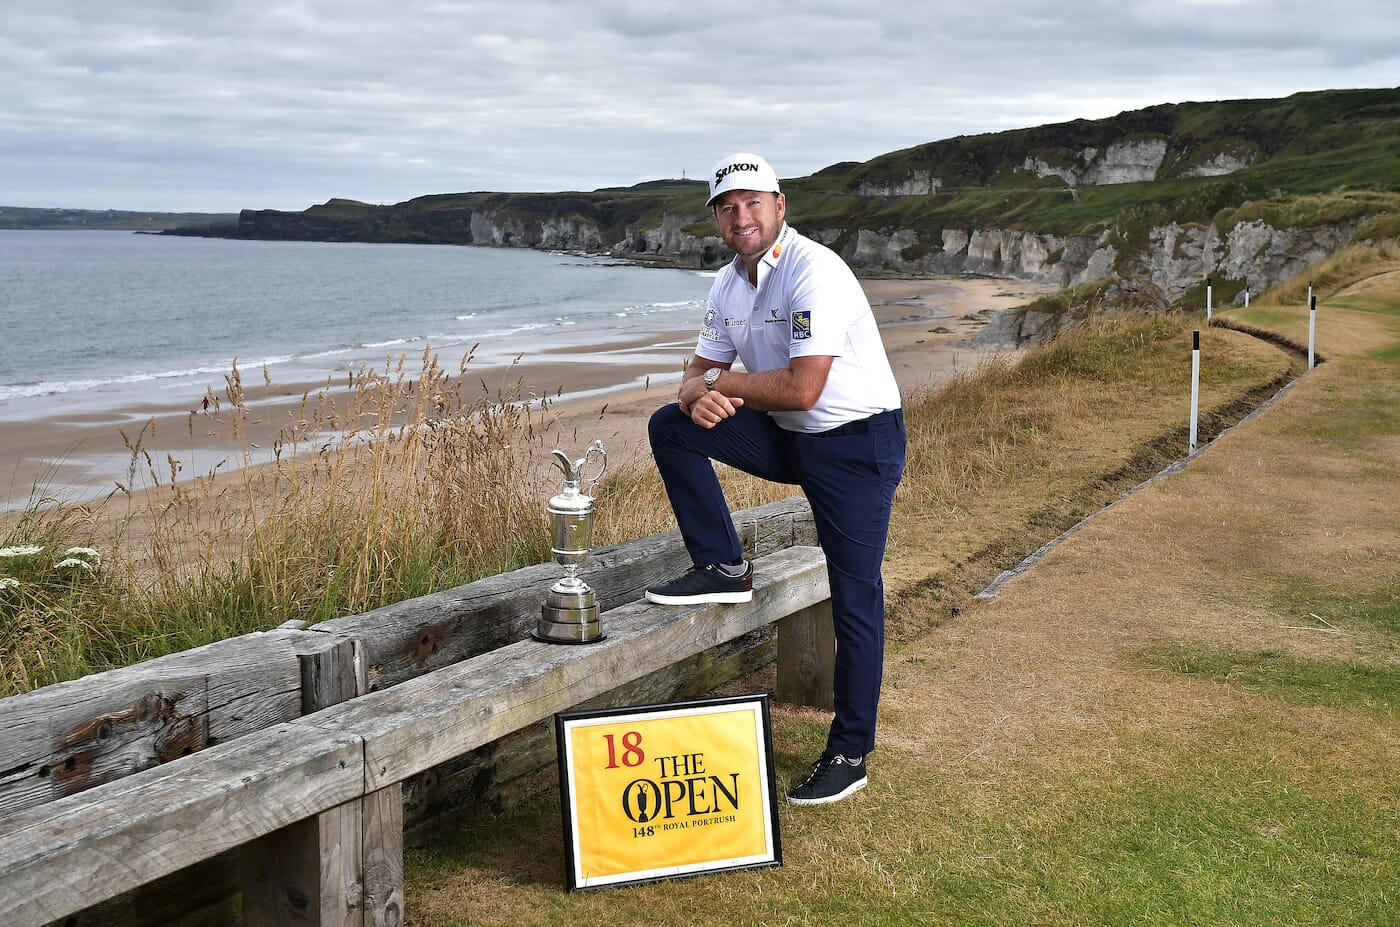 McDowell not heading to Portrush for fun, but to compete